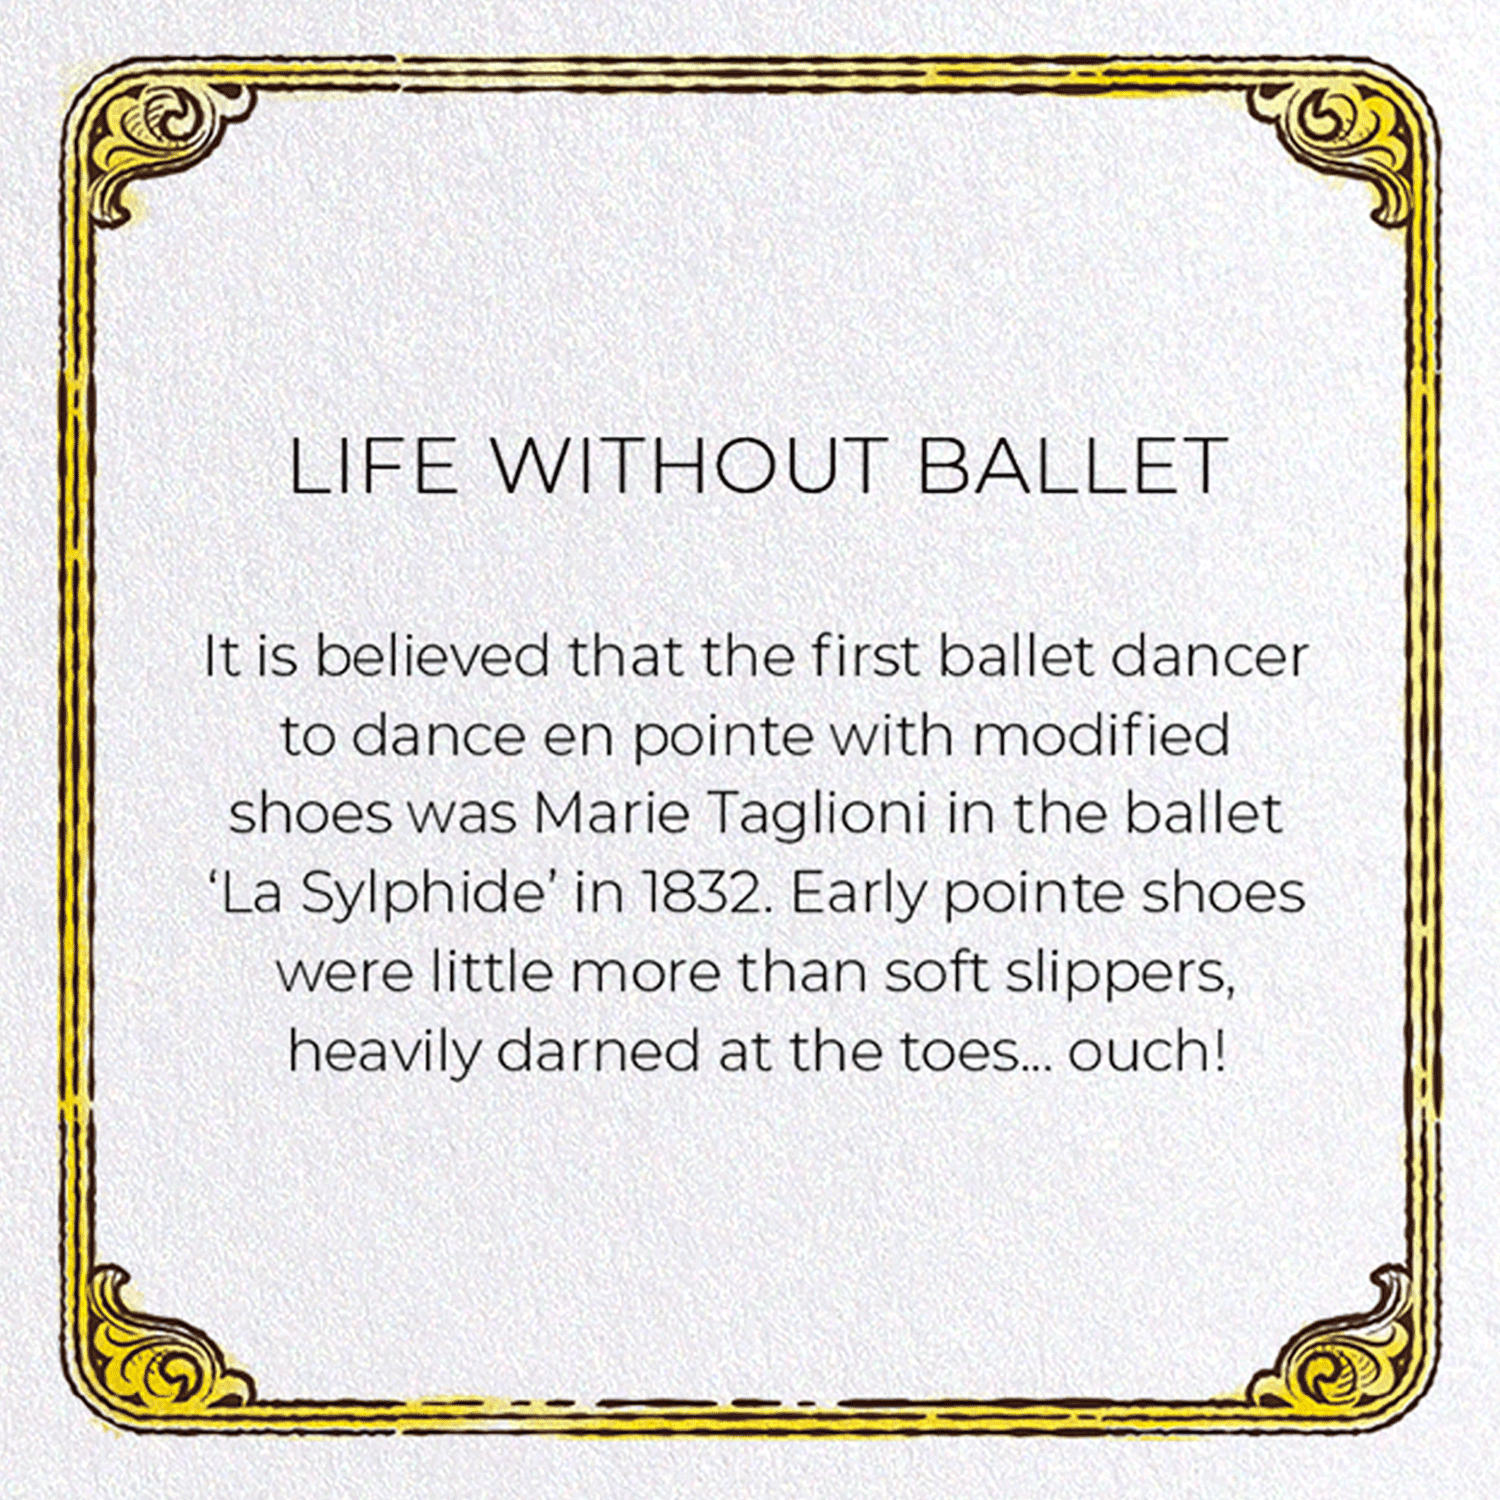 LIFE WITHOUT BALLET